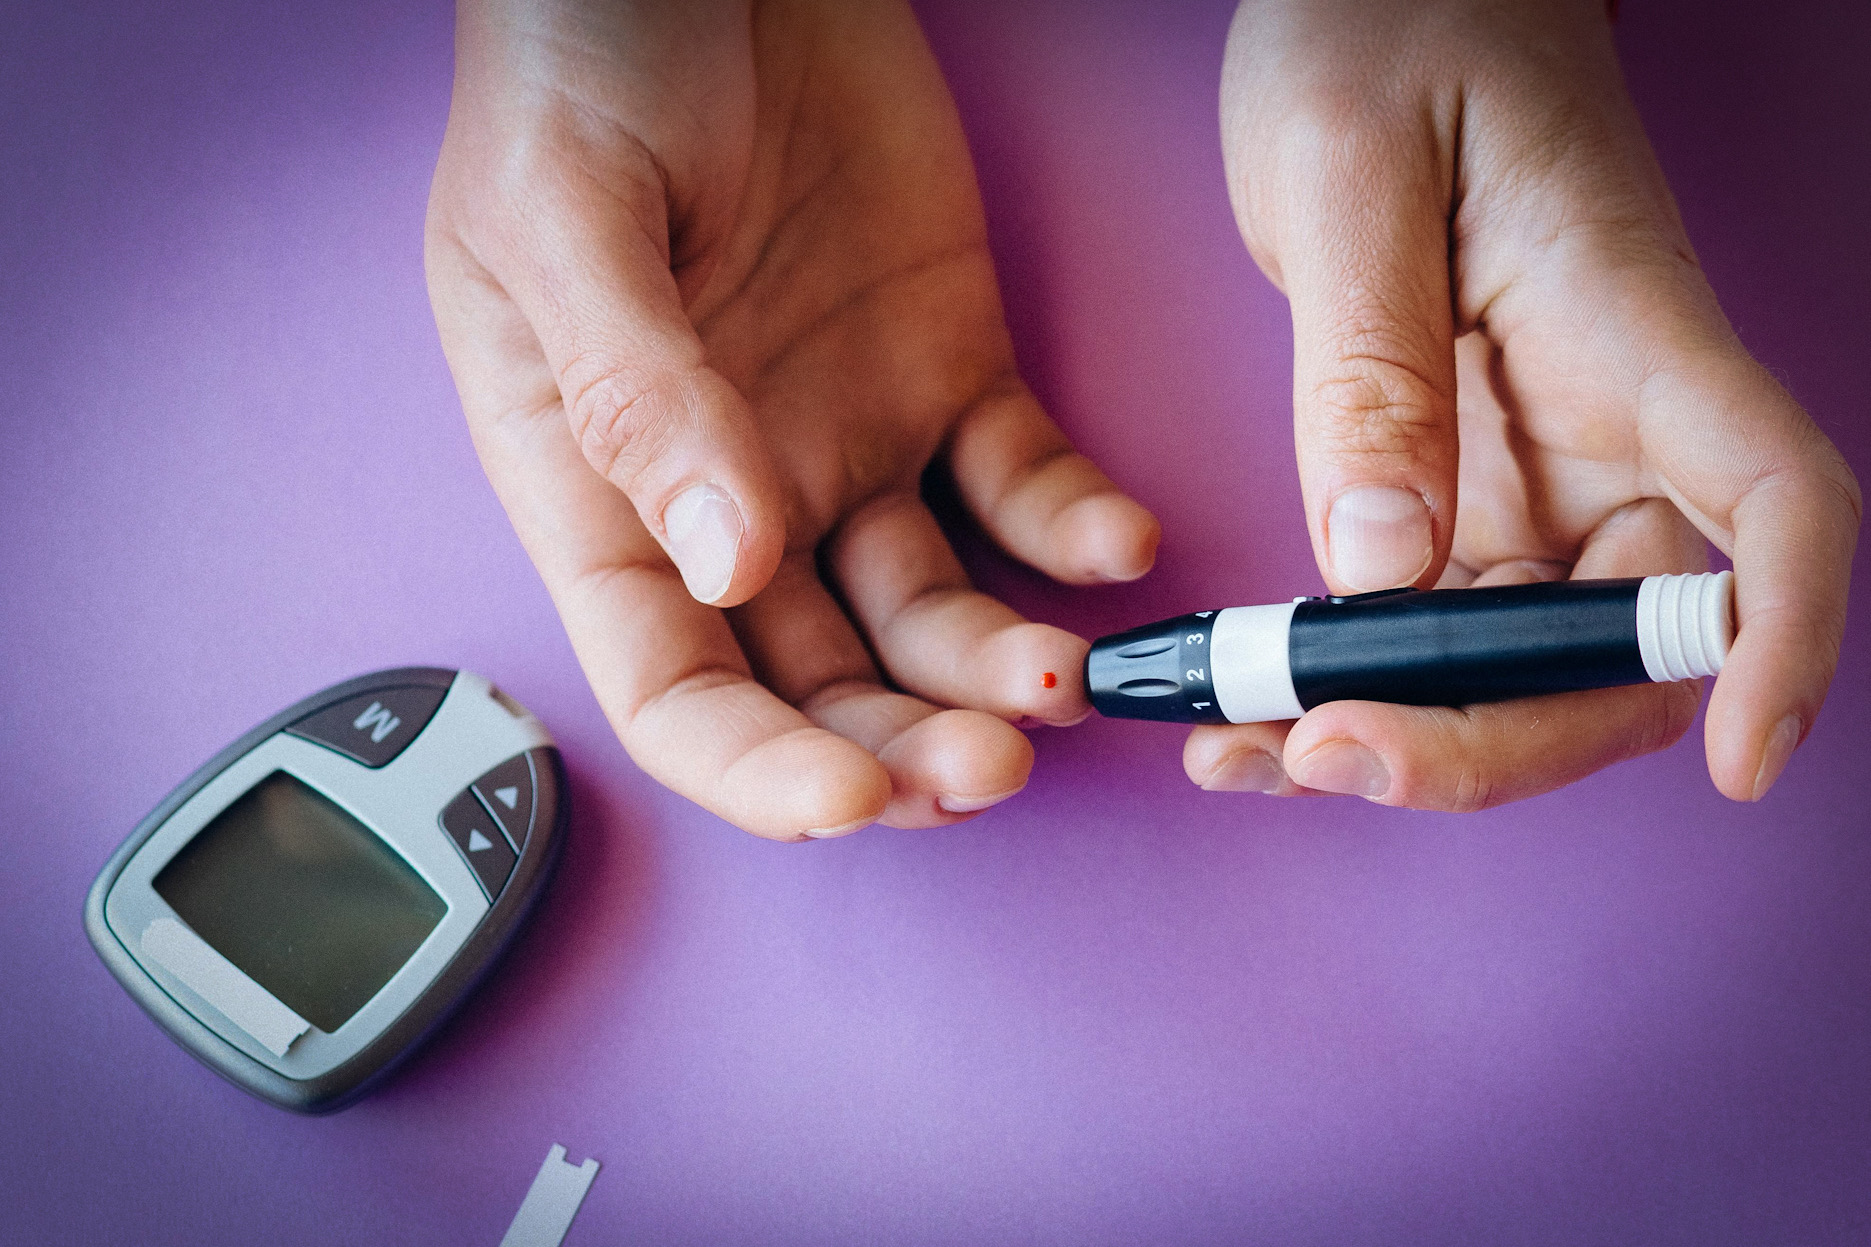 Measuring blood glucose level with a medical device.